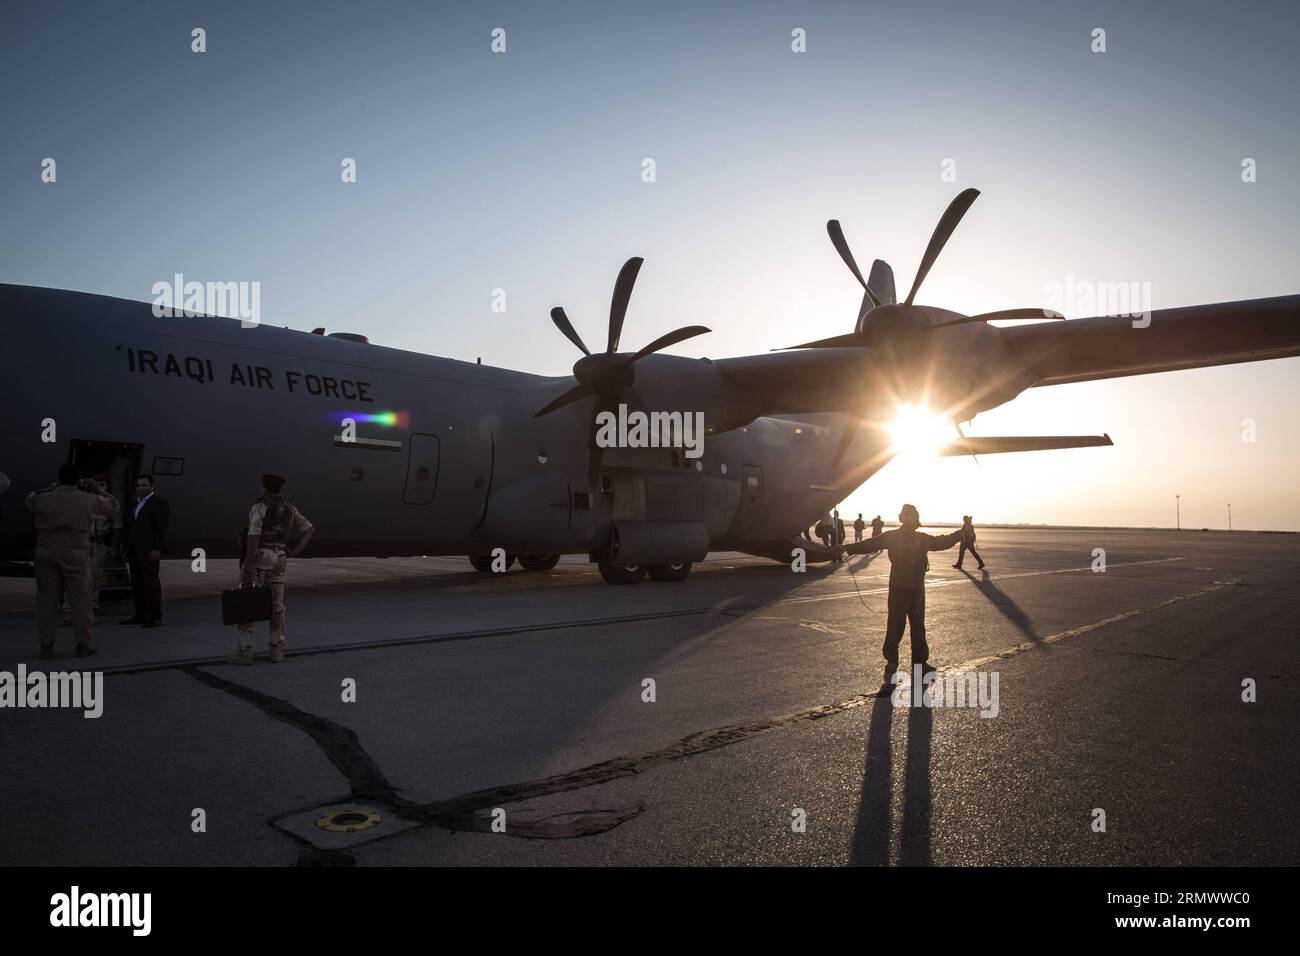 A C-130 transport plane arrives at Ein al-Asad Air Base in west Iraq s Anbar Province Nov. 11, 2014. US military experts arrived at Ein al-Asad Air Base on Nov.10 to help train and support Iraqi forces. ) IRAQ-EIN AL-ASAD AIR BASE-US TRAINERS ChenxXu PUBLICATIONxNOTxINxCHN   a C 130 Transportation Plane arrives AT a Al Asad Air Base in WEST Iraq S Anbar Province Nov 11 2014 U.S. Military Experts arrived AT a Al Asad Air Base ON Nov 10 to Help Train and Support Iraqi Forces Iraq a Al Asad Air Base U.S. Trainers  PUBLICATIONxNOTxINxCHN Stock Photo